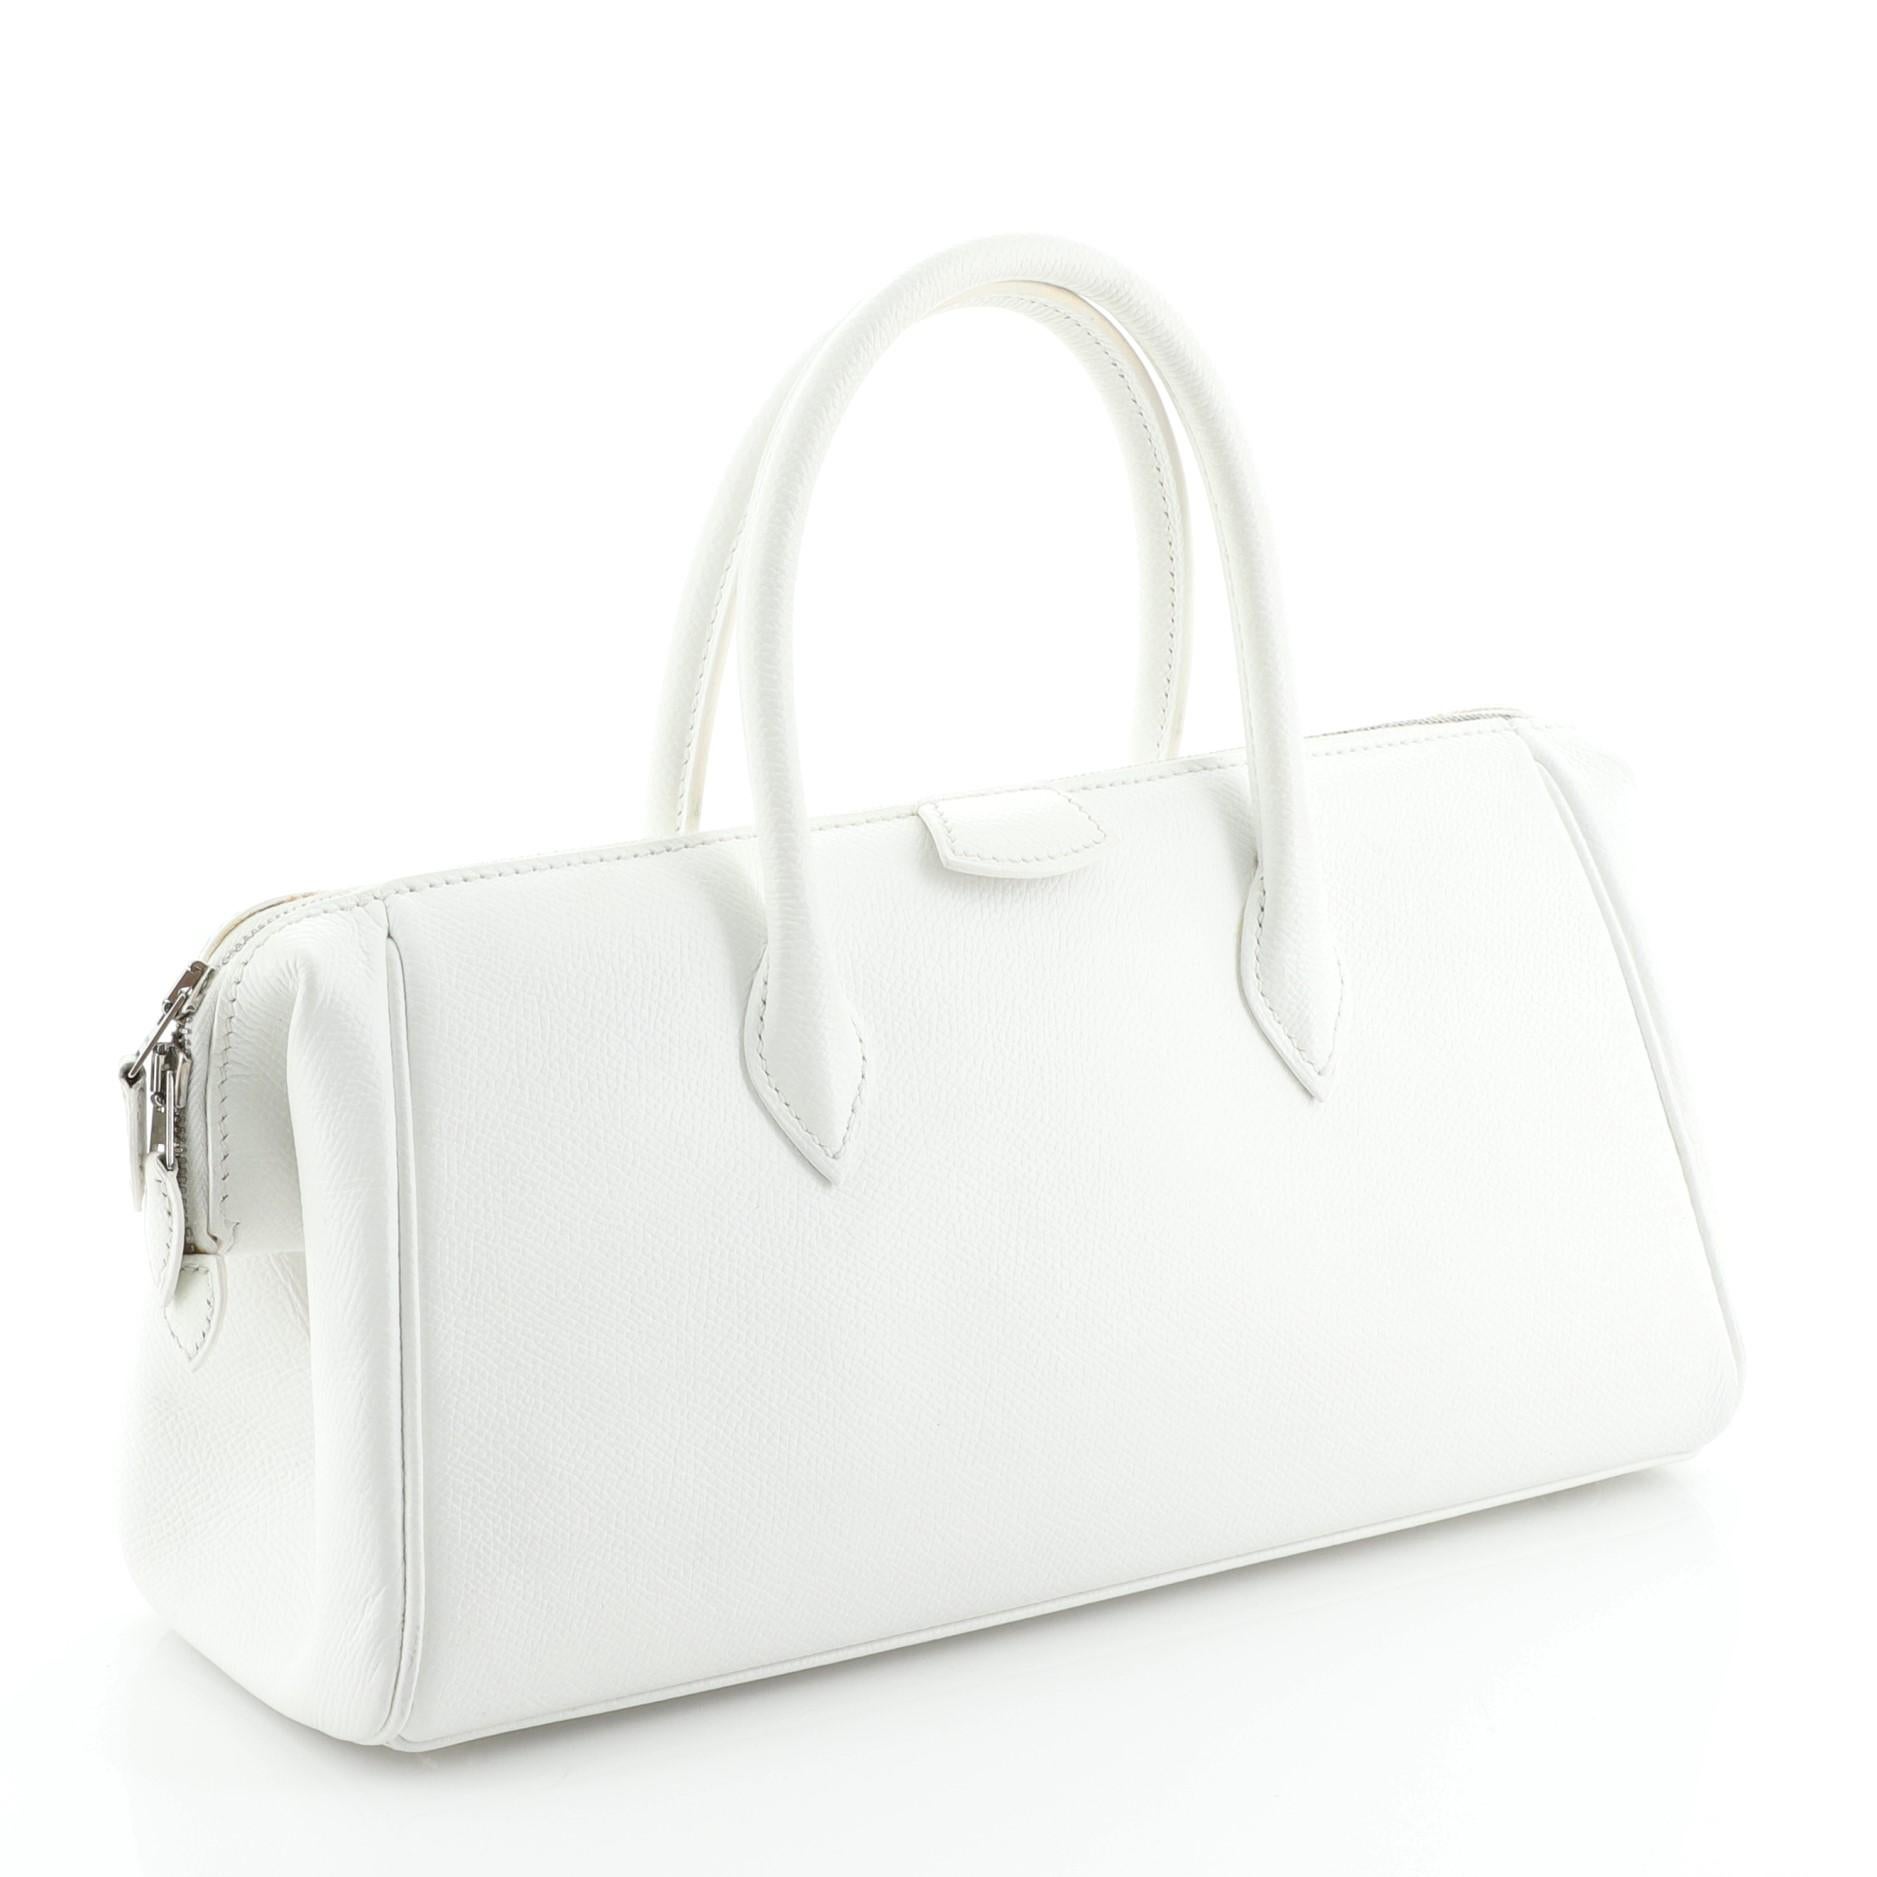 This Hermes Paris Bombay Satchel Epsom 27, crafted in white Epsom leather, features dual rolled handles and palladium hardware. Its zip closure opens to a Natural neutral Agneau leather interior with slip pockets. Date stamp reads: J Square (2006).